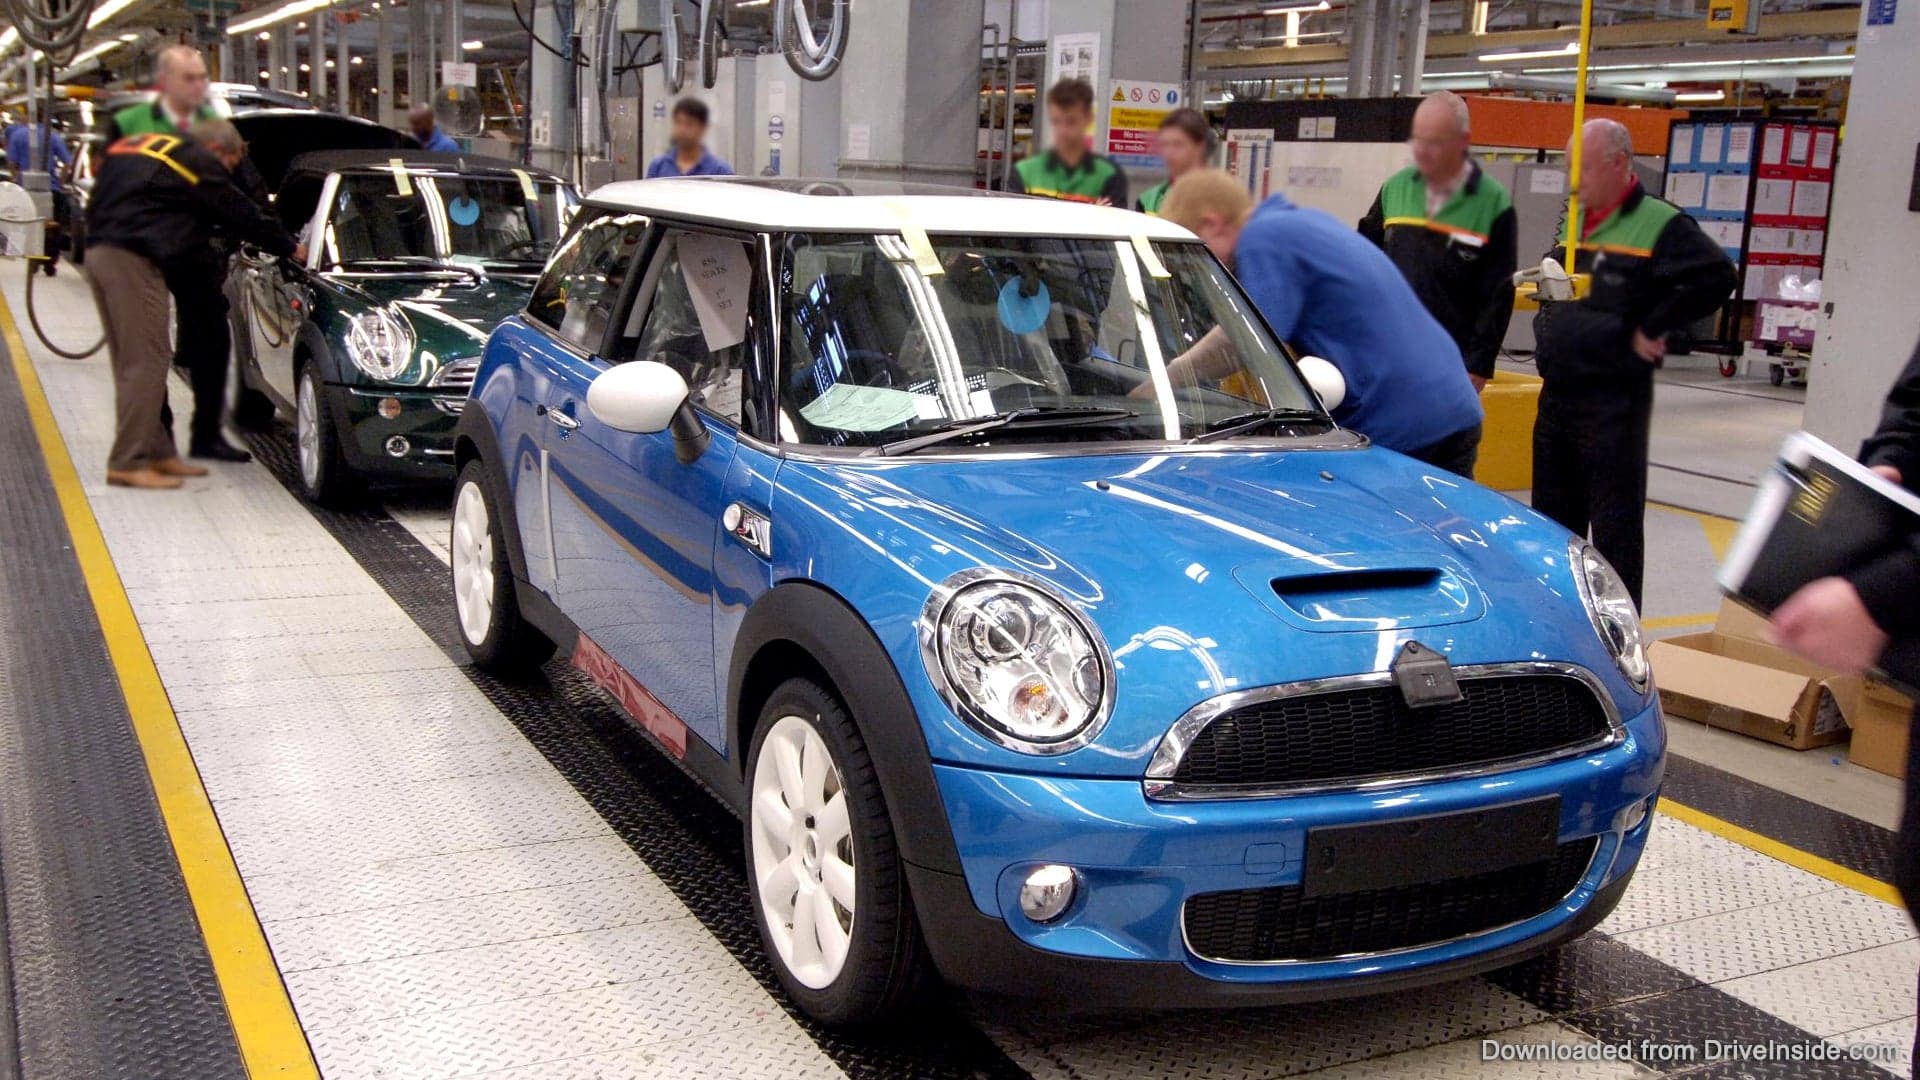 The Upcoming Fully-Electric Mini Will Be a 3-Door Hatchback